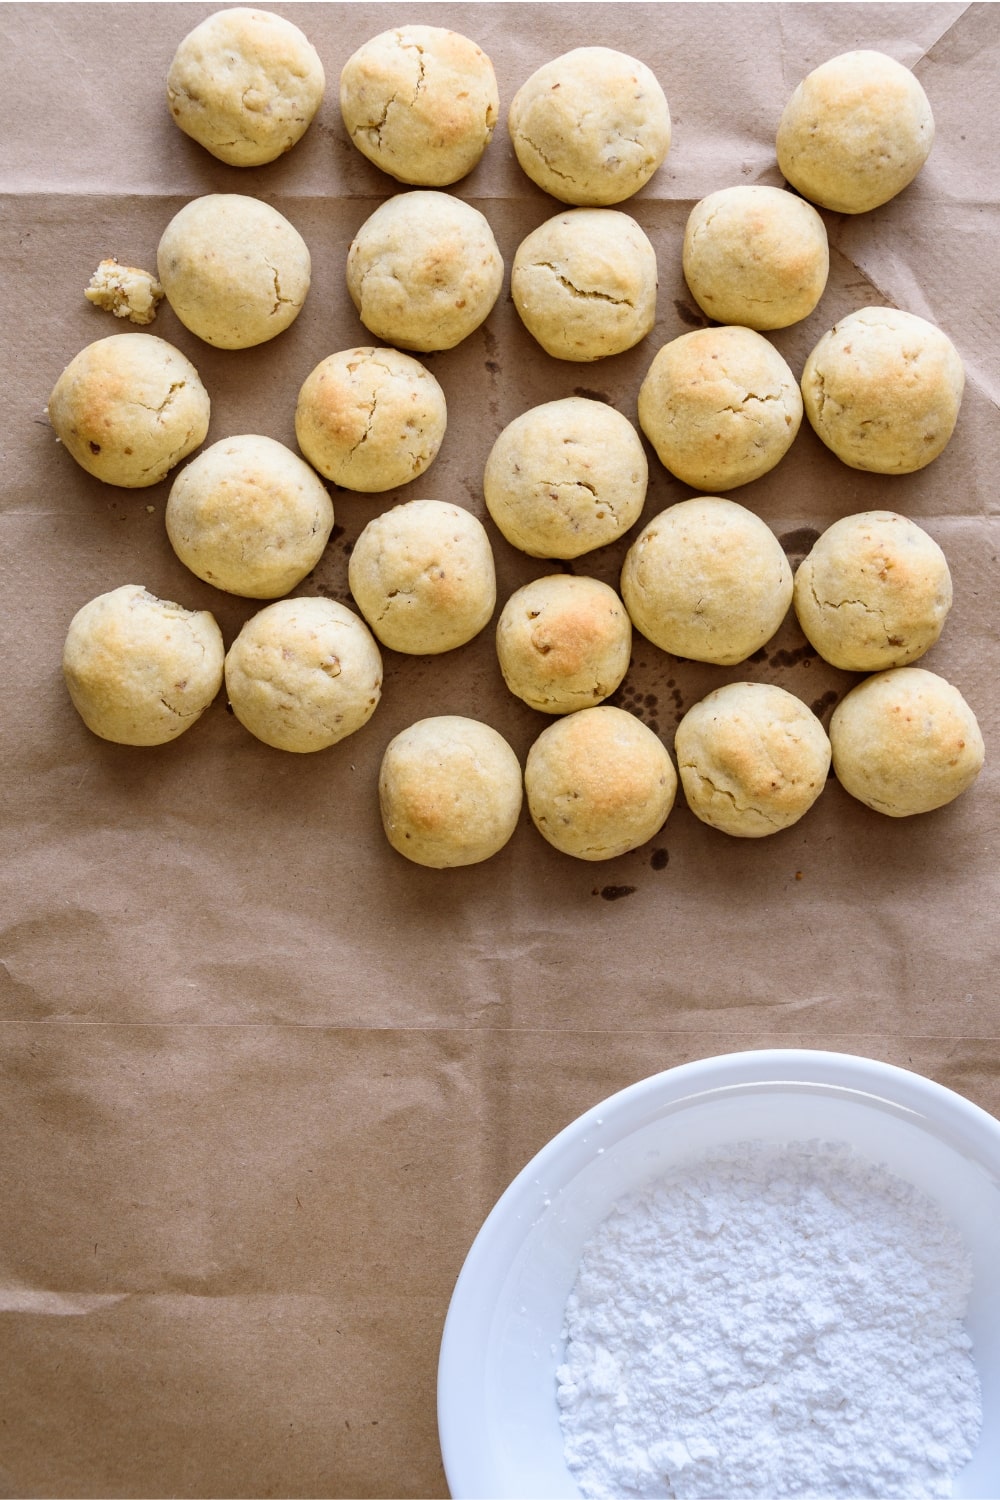 Fresh baked Italian wedding cookies on parchment paper and bowl of powdered sugar ready to be coated.